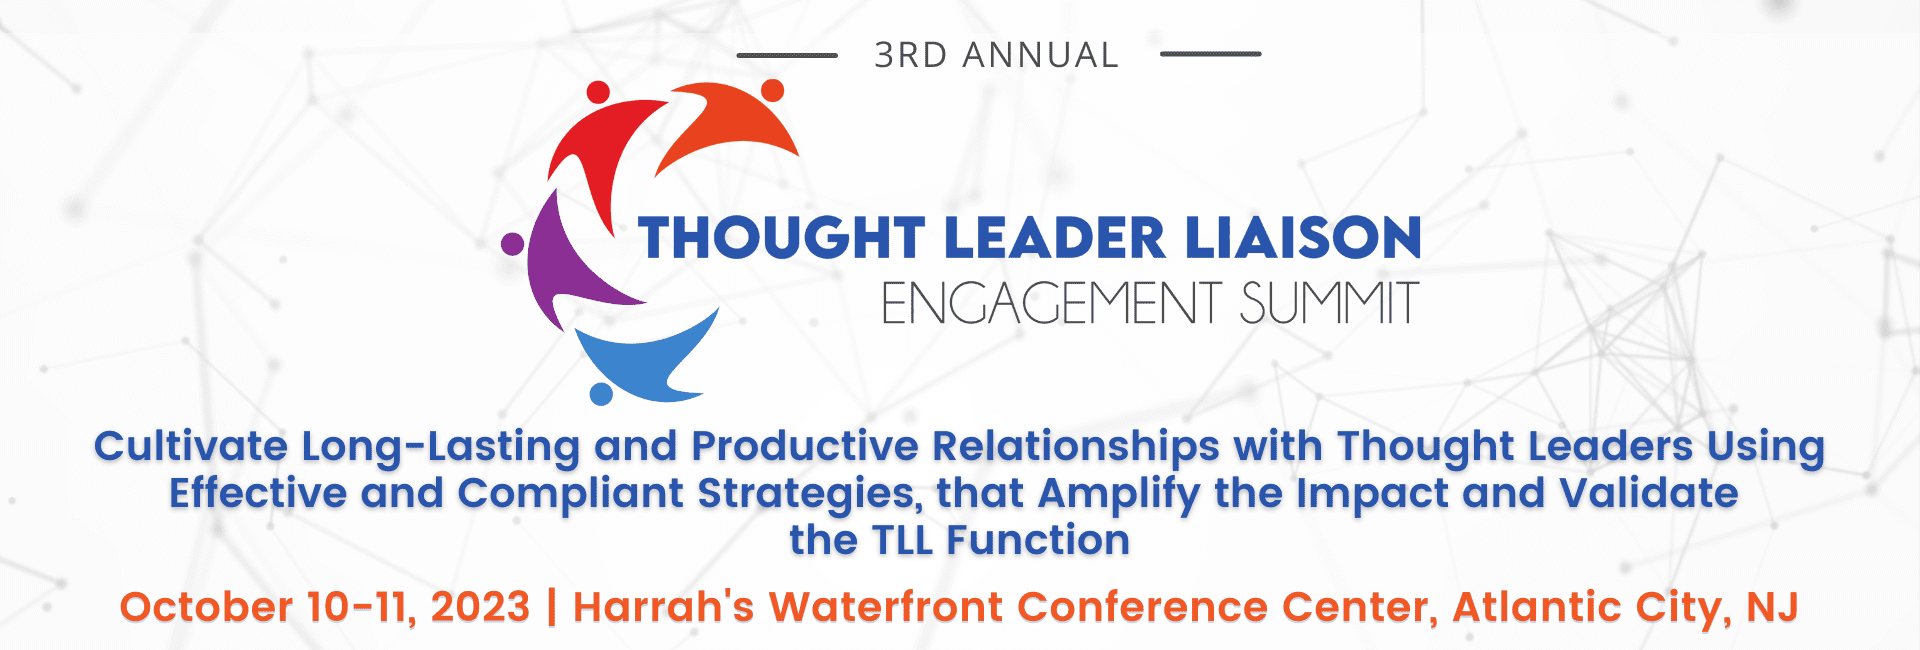 Hero Banner of 3rd Annual Thought Leader Liaison Engagement Summit